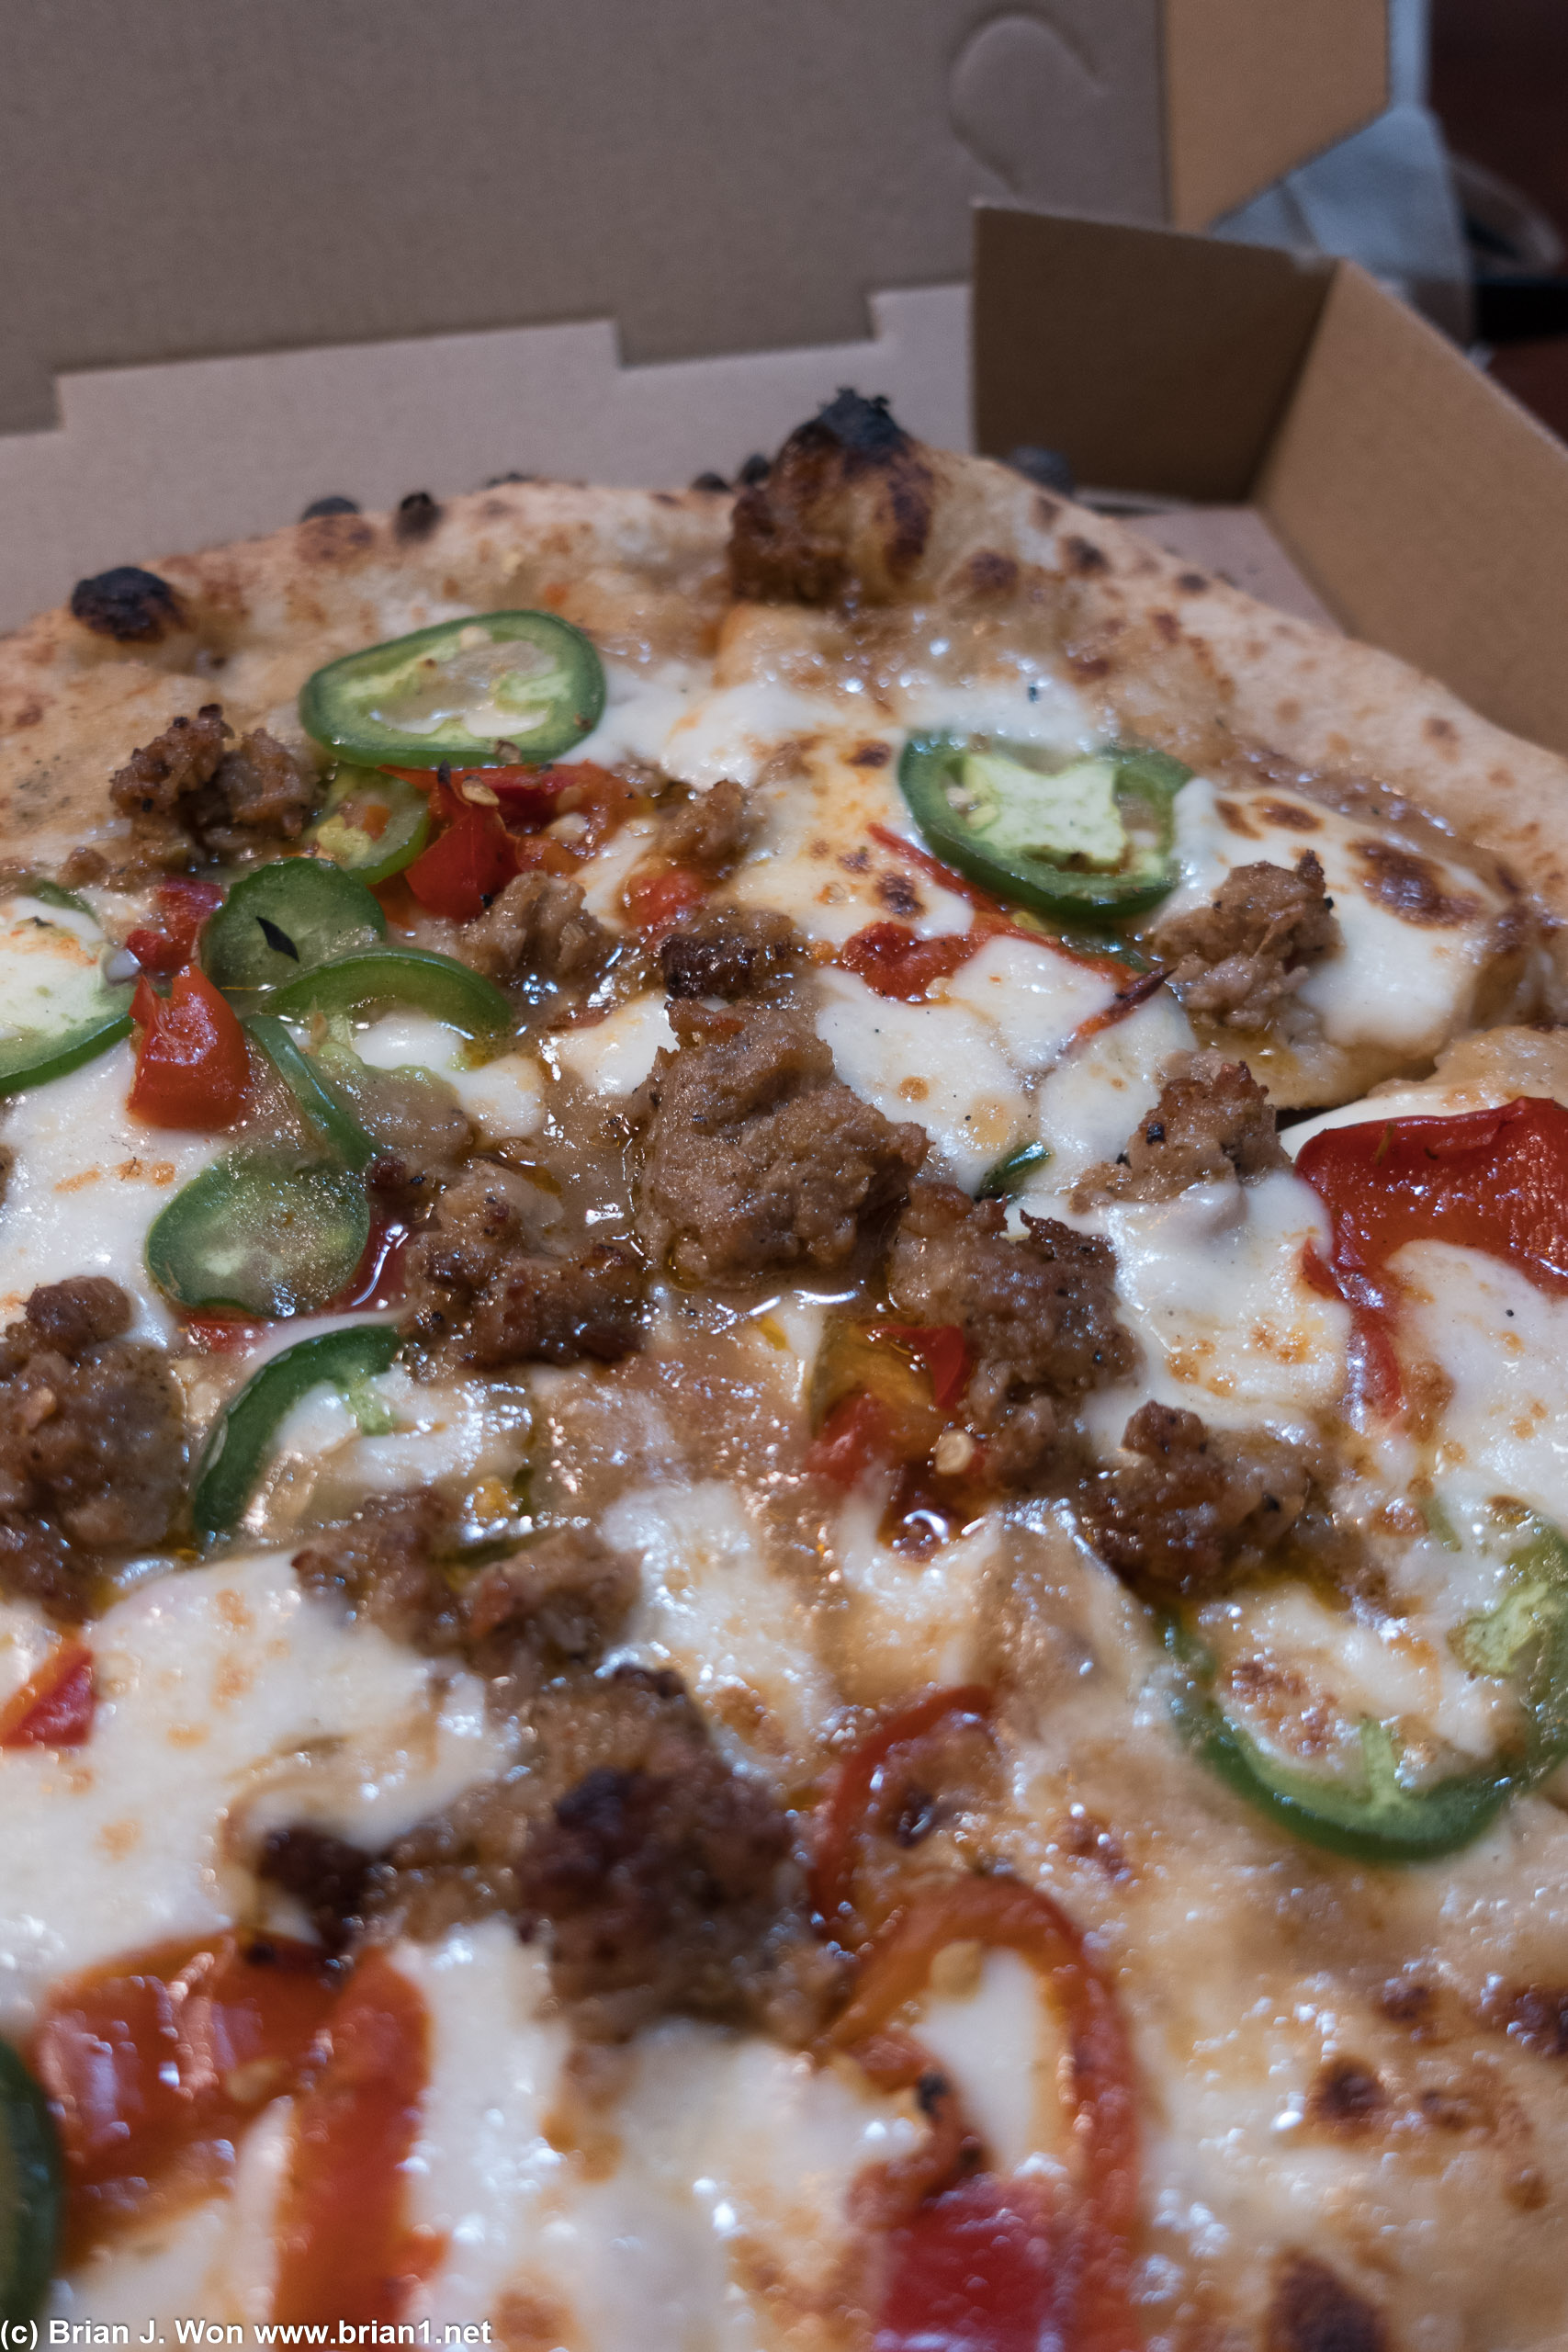 Sausage, jalapeno, and peppers.